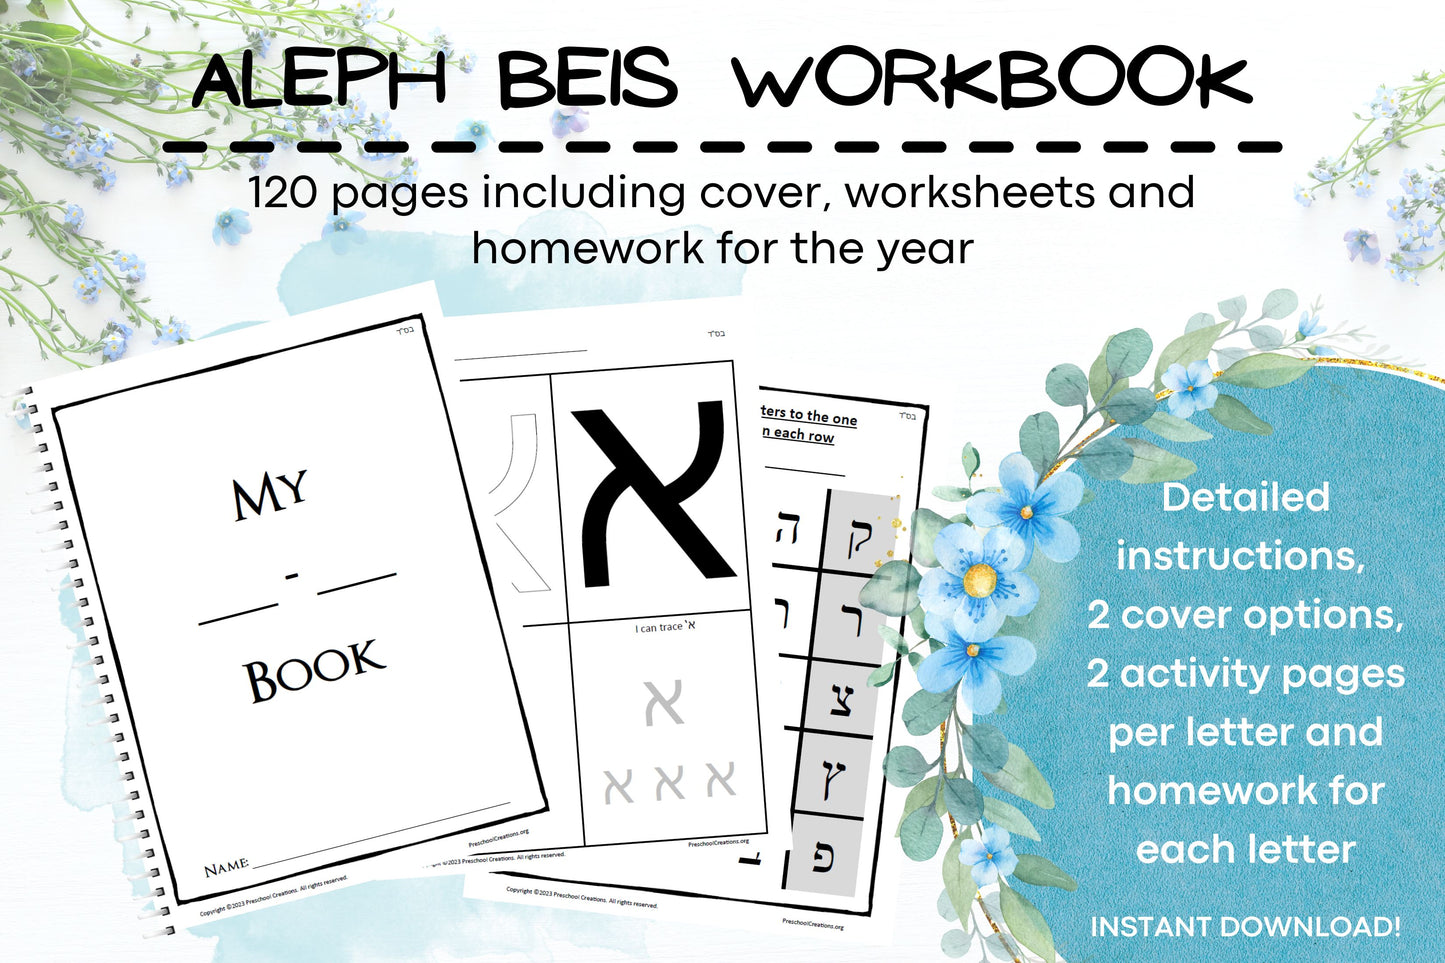 2 pages of instructions for use A cover in 2 languages, English and Yiddish, 1 activity worksheet for each letter of the aleph beis 1 focused writing worksheet for each letter Homework pages to send home each week Unlock Alef Bet Mastery with Our Aleph Beis Workbook!  Dive into the world of Alef Bet with our 120-page Aleph Beis Workbook! This comprehensive curriculum is designed to make learning the aleph-beis an engaging and fulfilling experience for young learners.